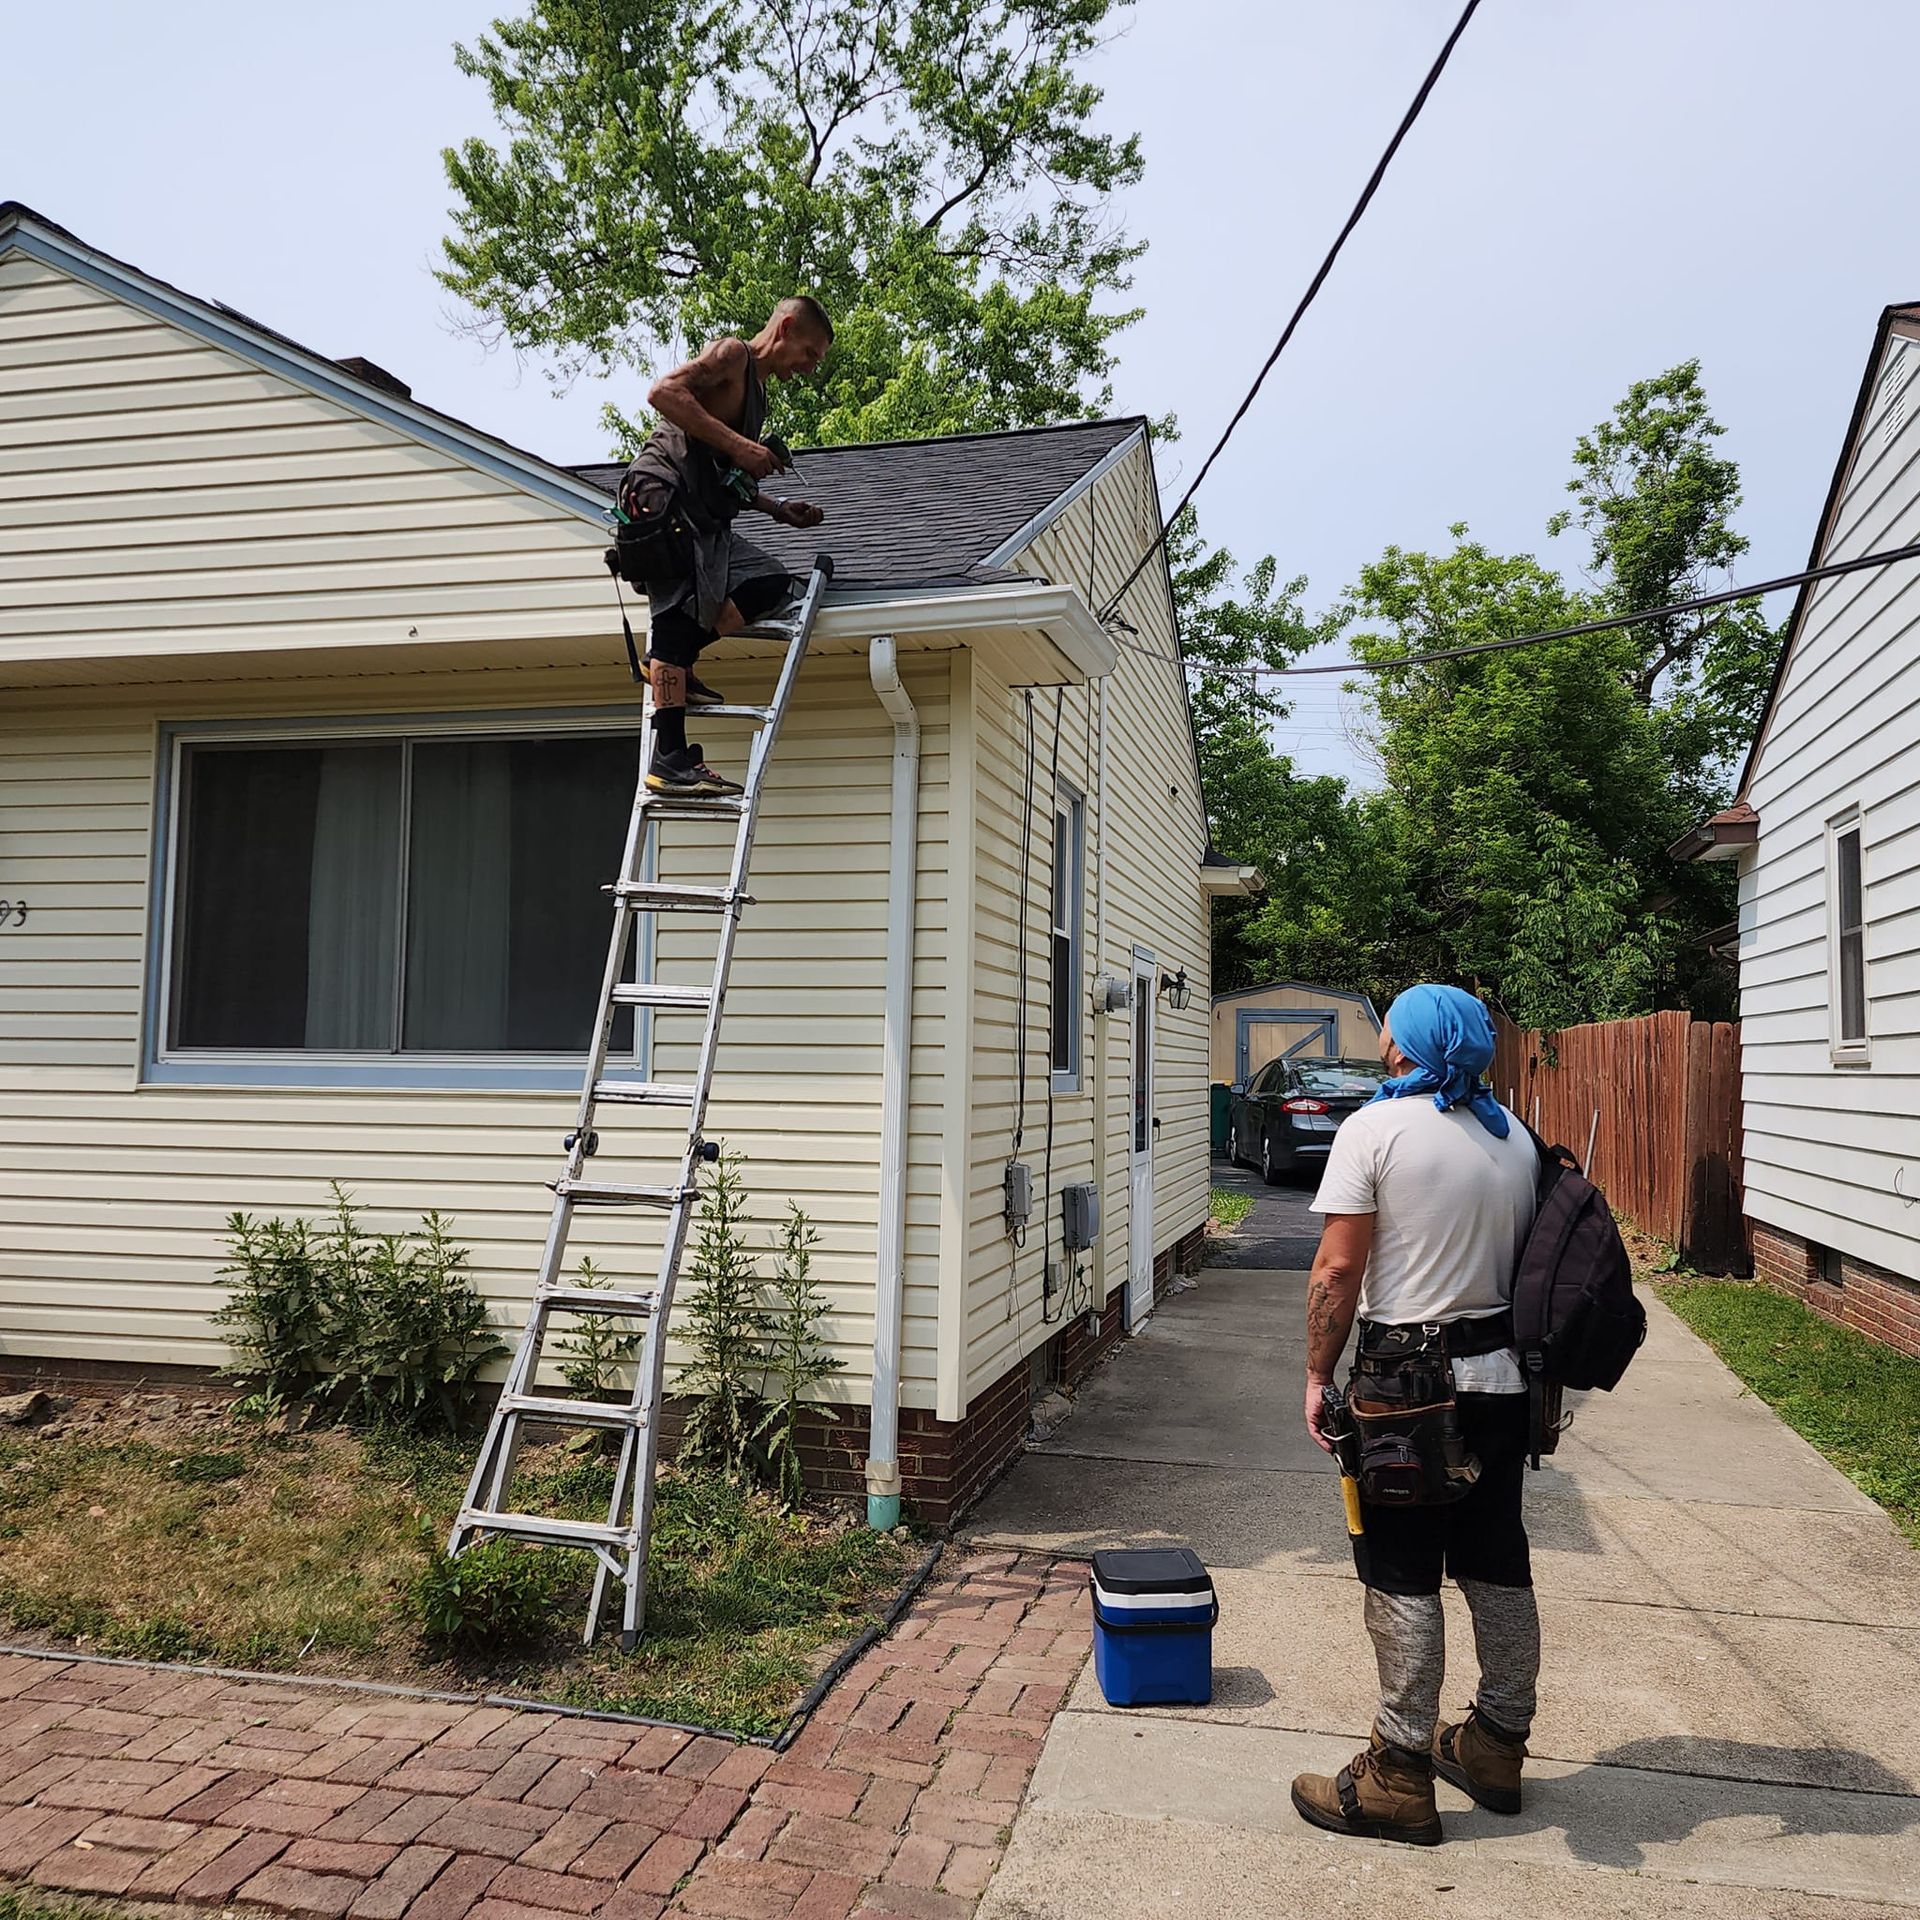 A man on a ladder is working on the roof of a house